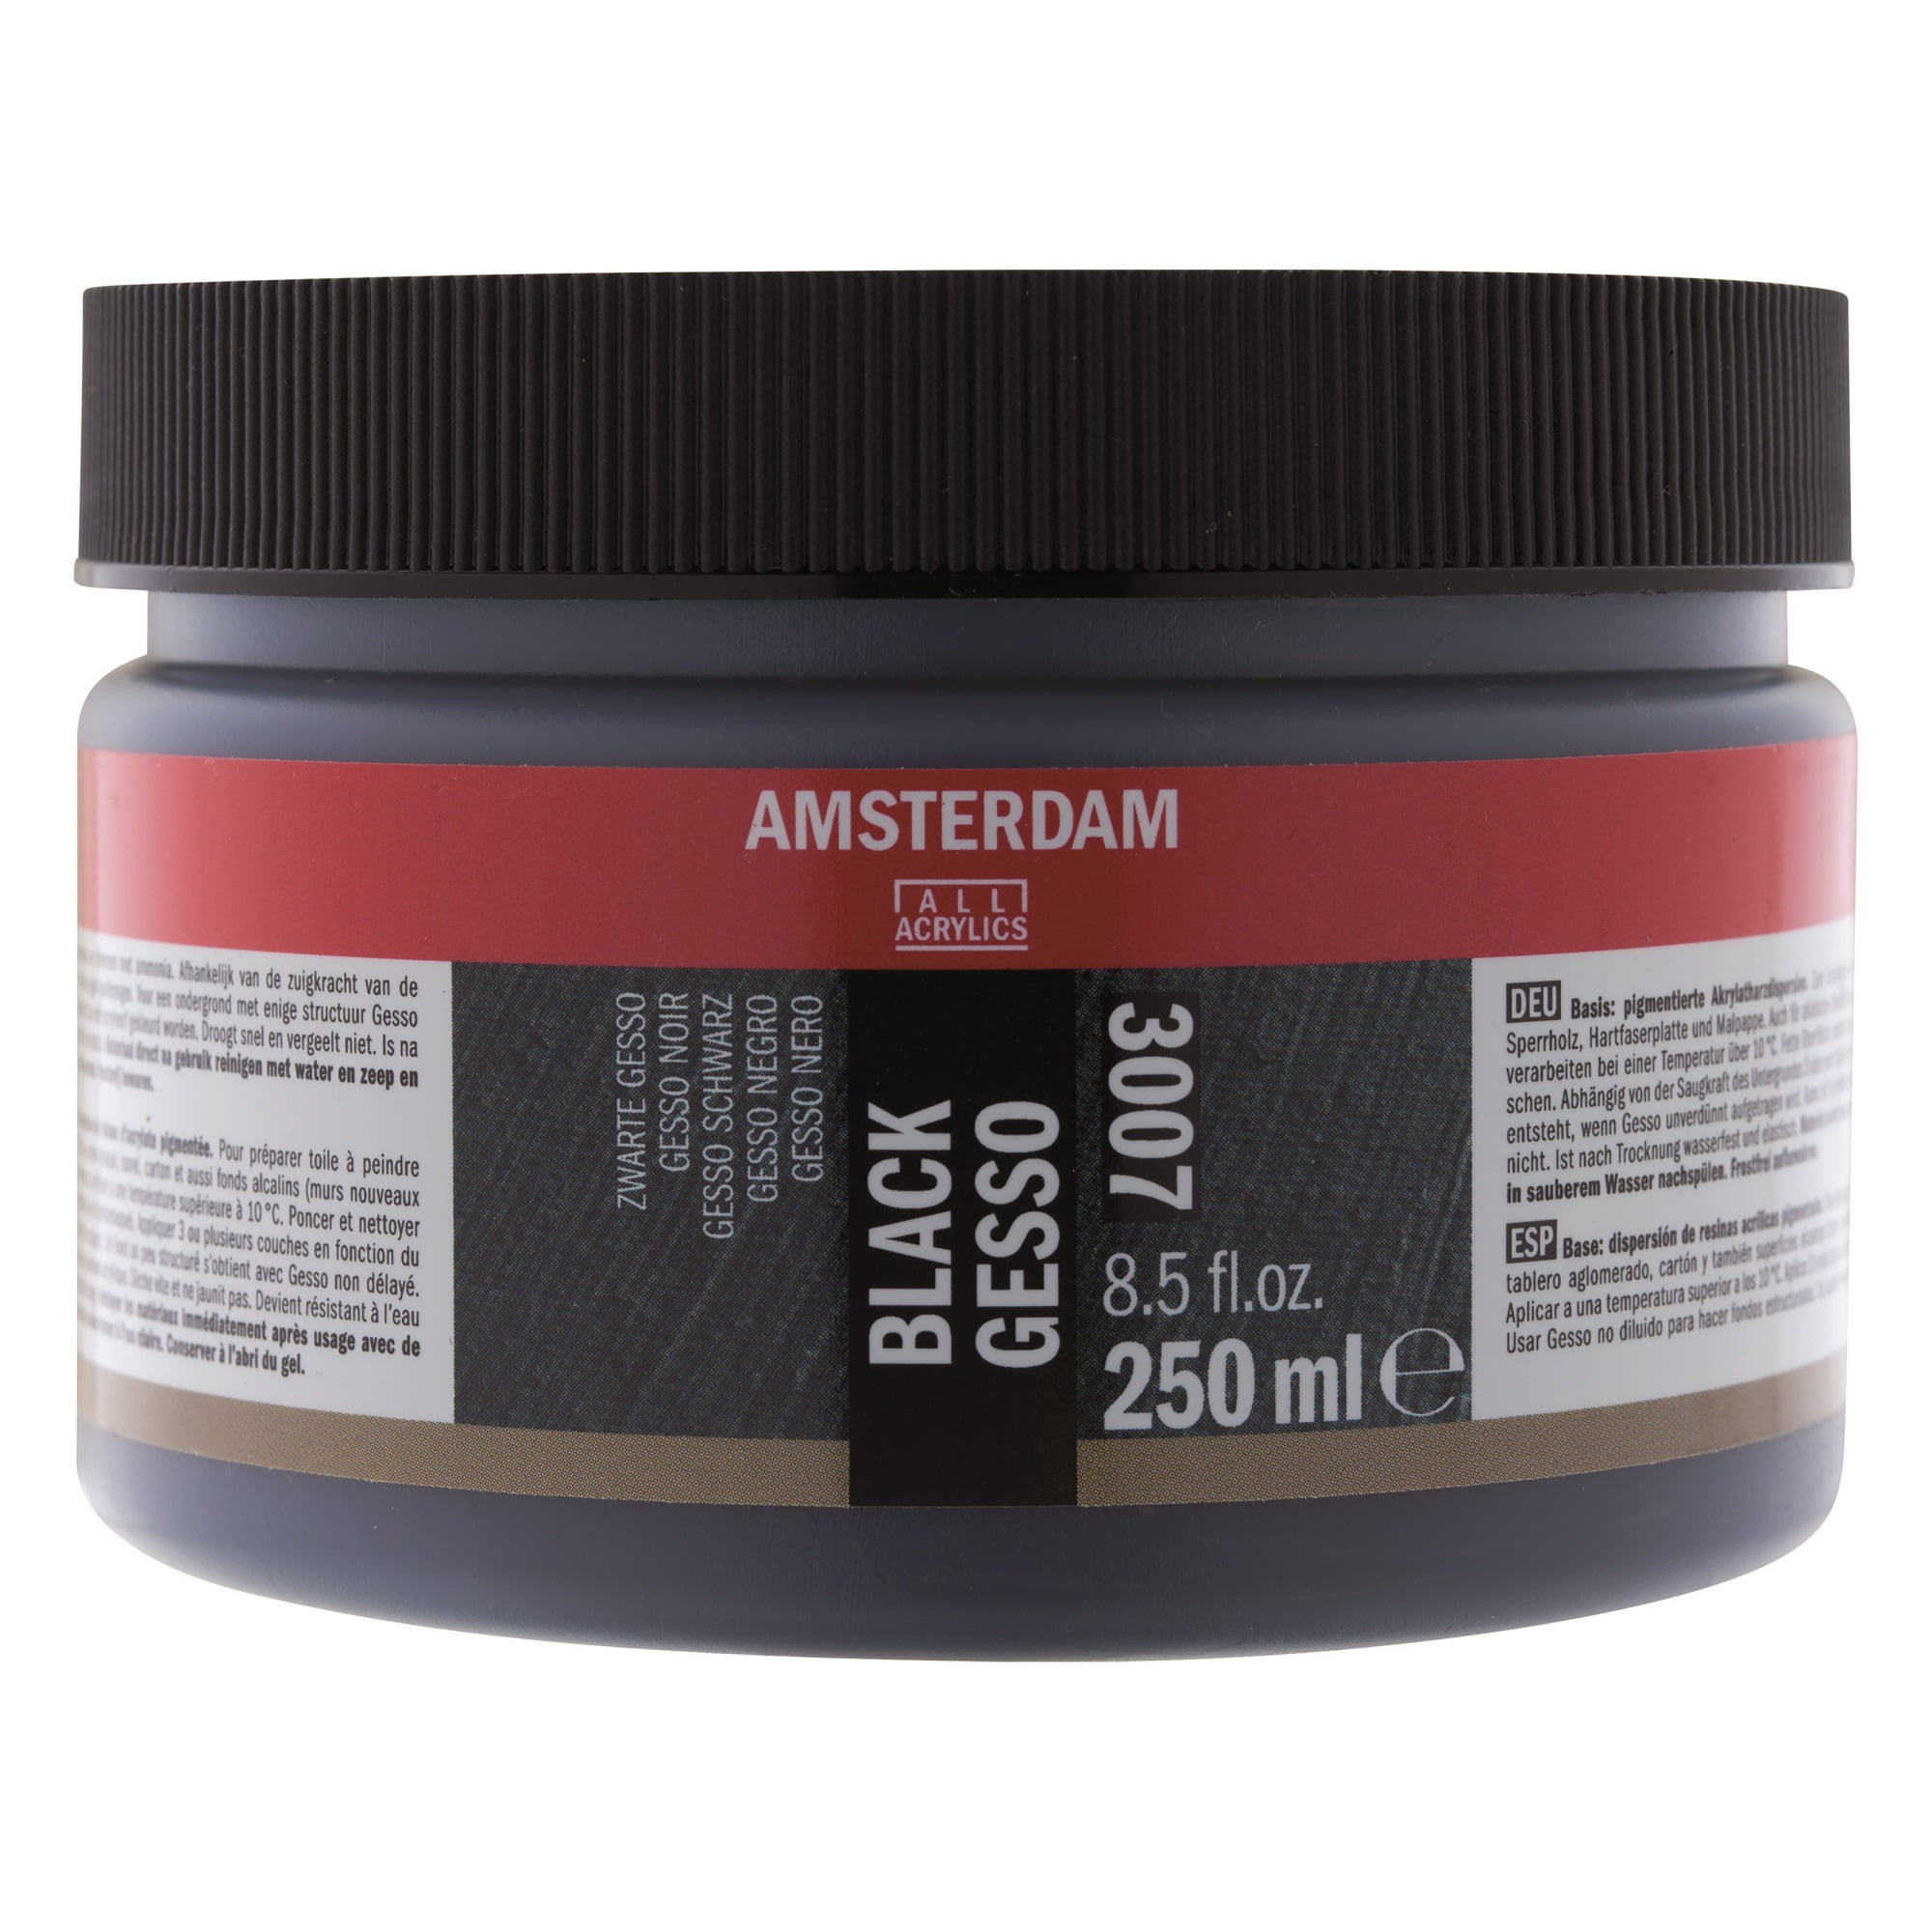 Buy Studio Black Gesso Primer (250ml) from The Stationers